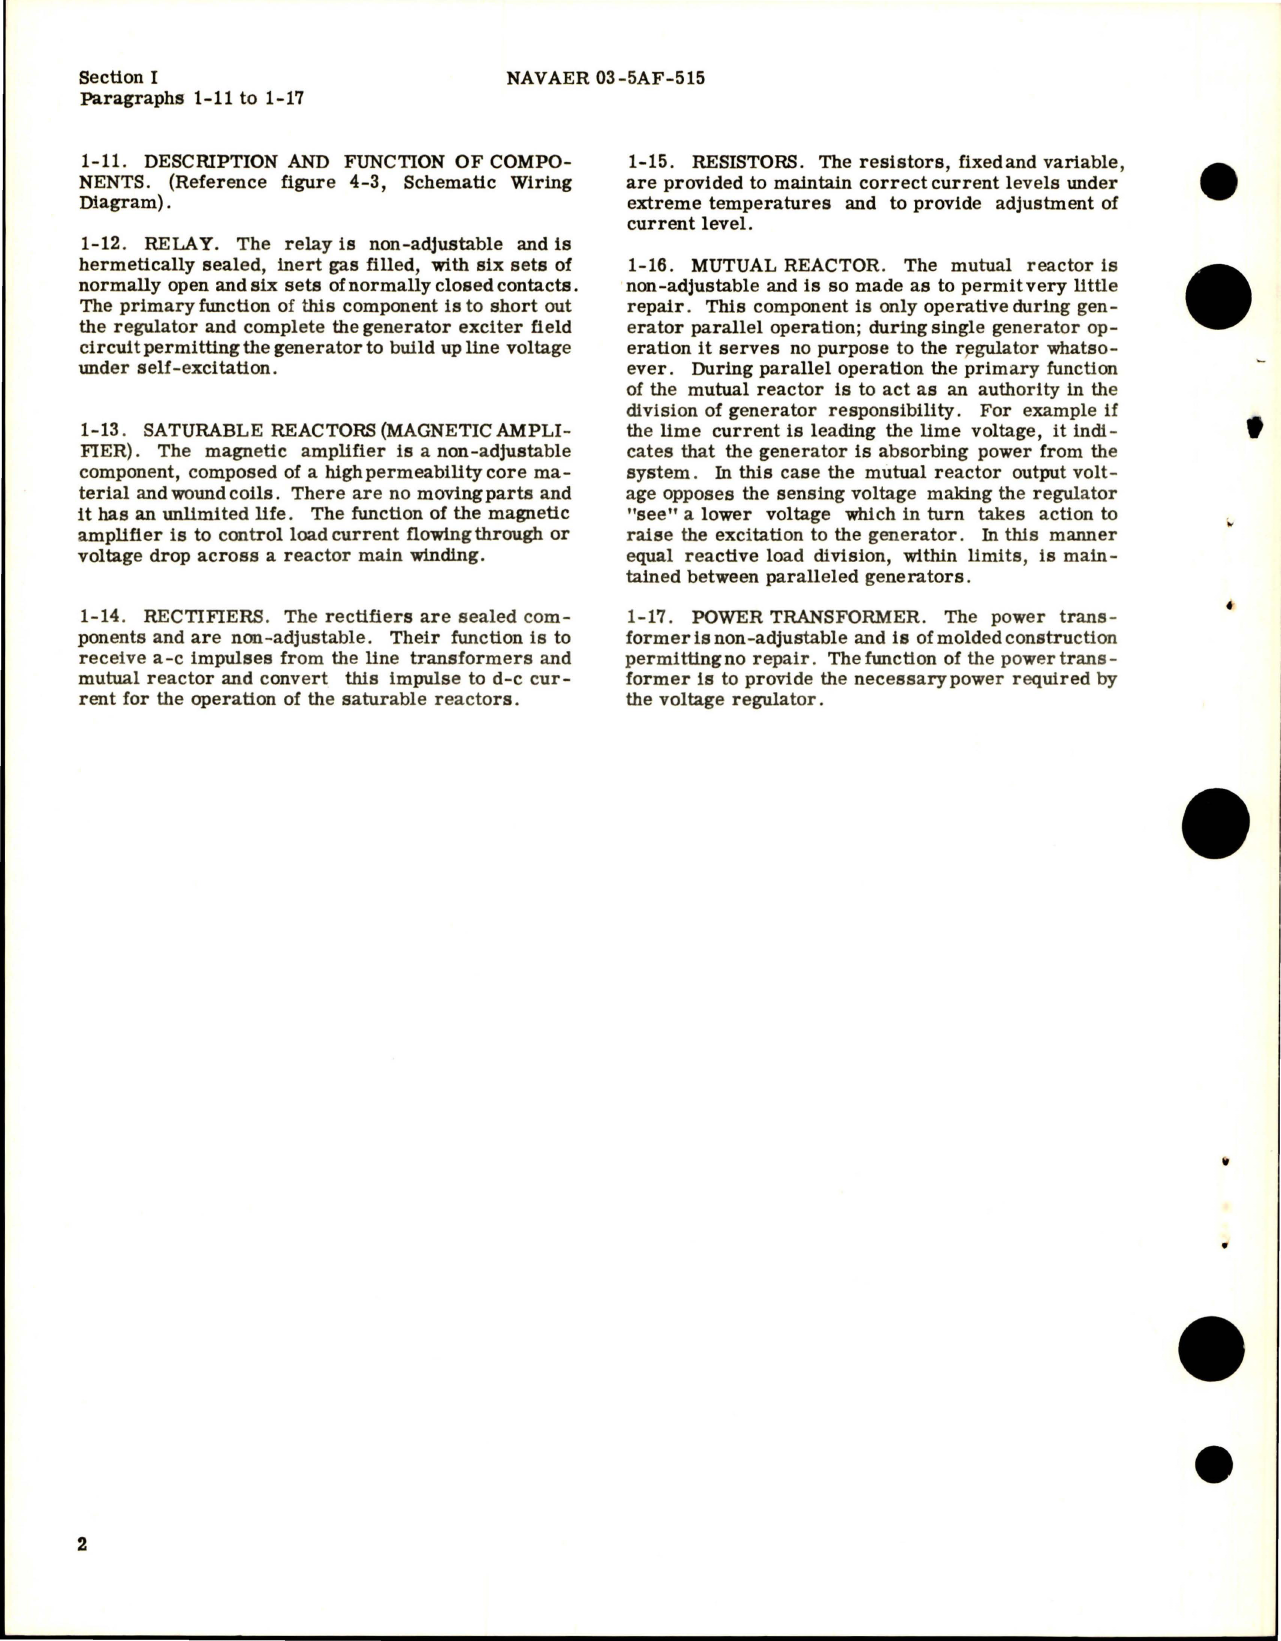 Sample page 6 from AirCorps Library document: Operation, Service and Overhaul Instructions for Voltage Regulator - Static Type - Part A40A1750